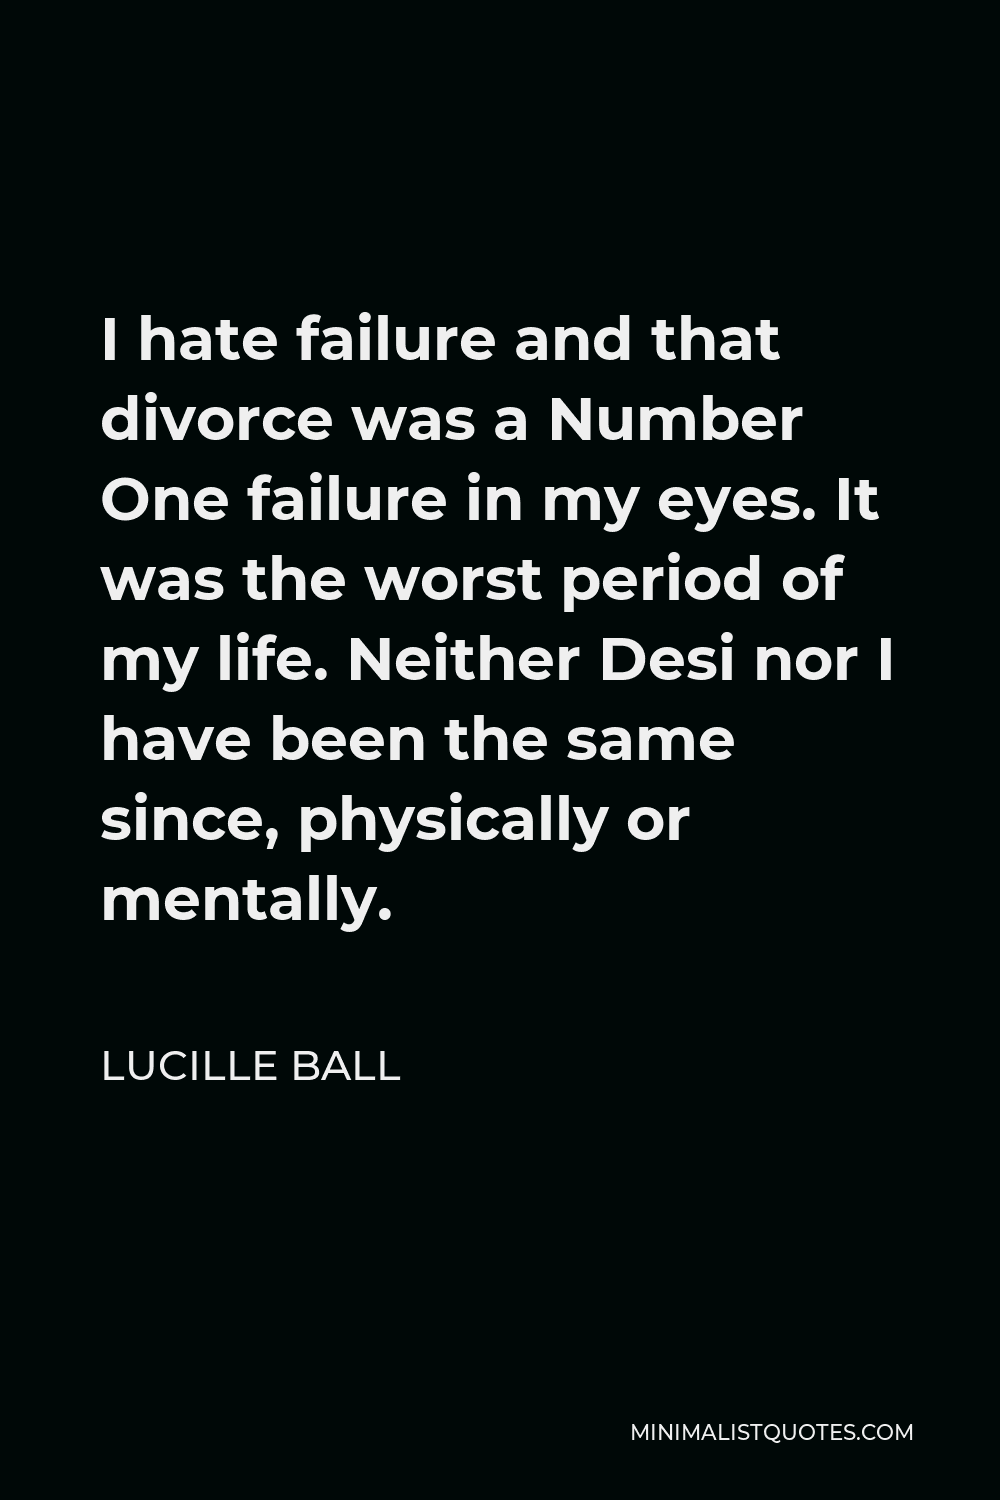 Lucille Ball Quote - I hate failure and that divorce was a Number One failure in my eyes. It was the worst period of my life. Neither Desi nor I have been the same since, physically or mentally.